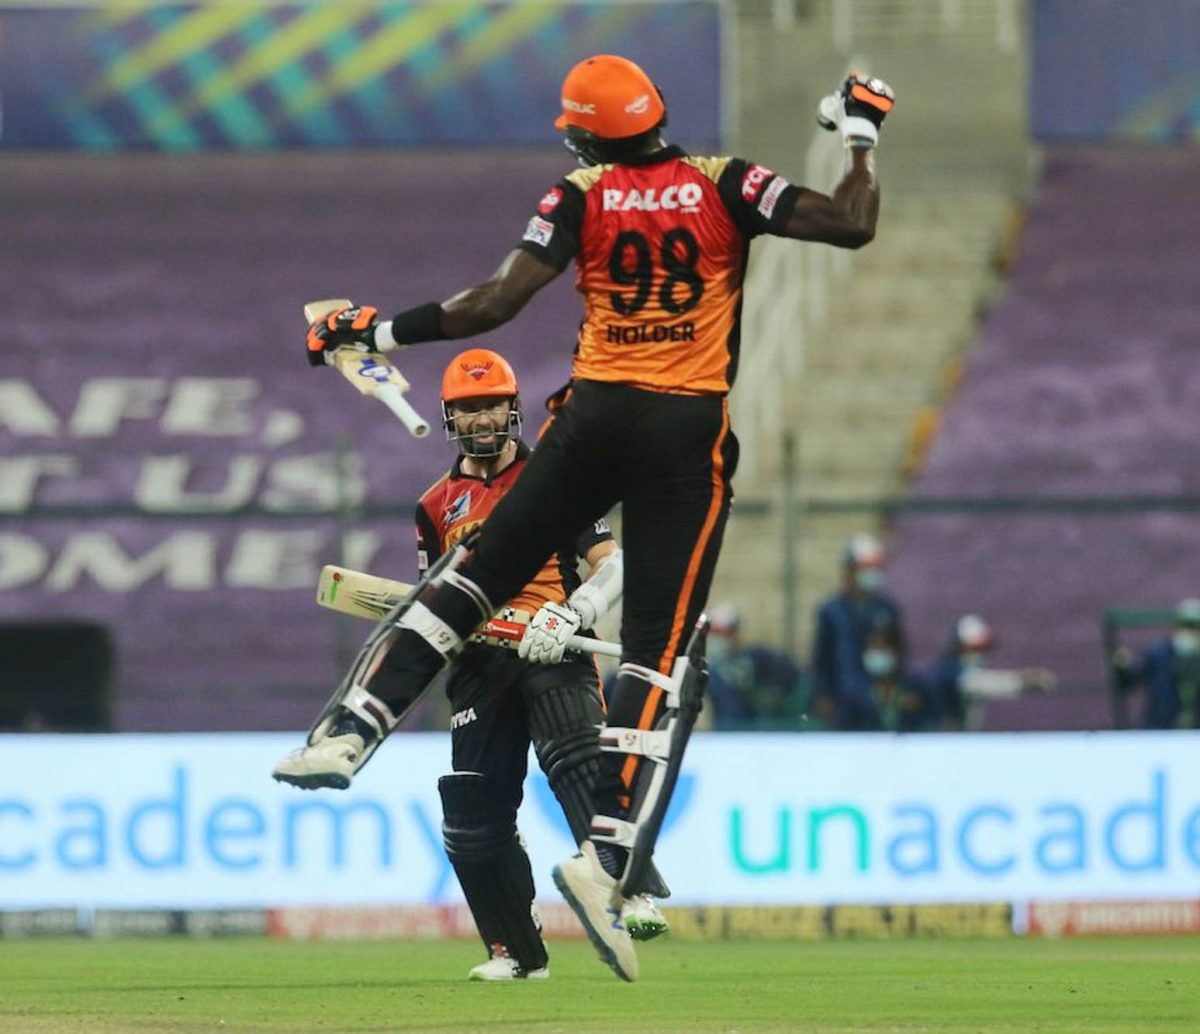 Jason Holder and Kane Williamson starred as Sunrisers Hyderabad beat Royal Challengers Bangalore to reach Qualifier 2 yesterday.
